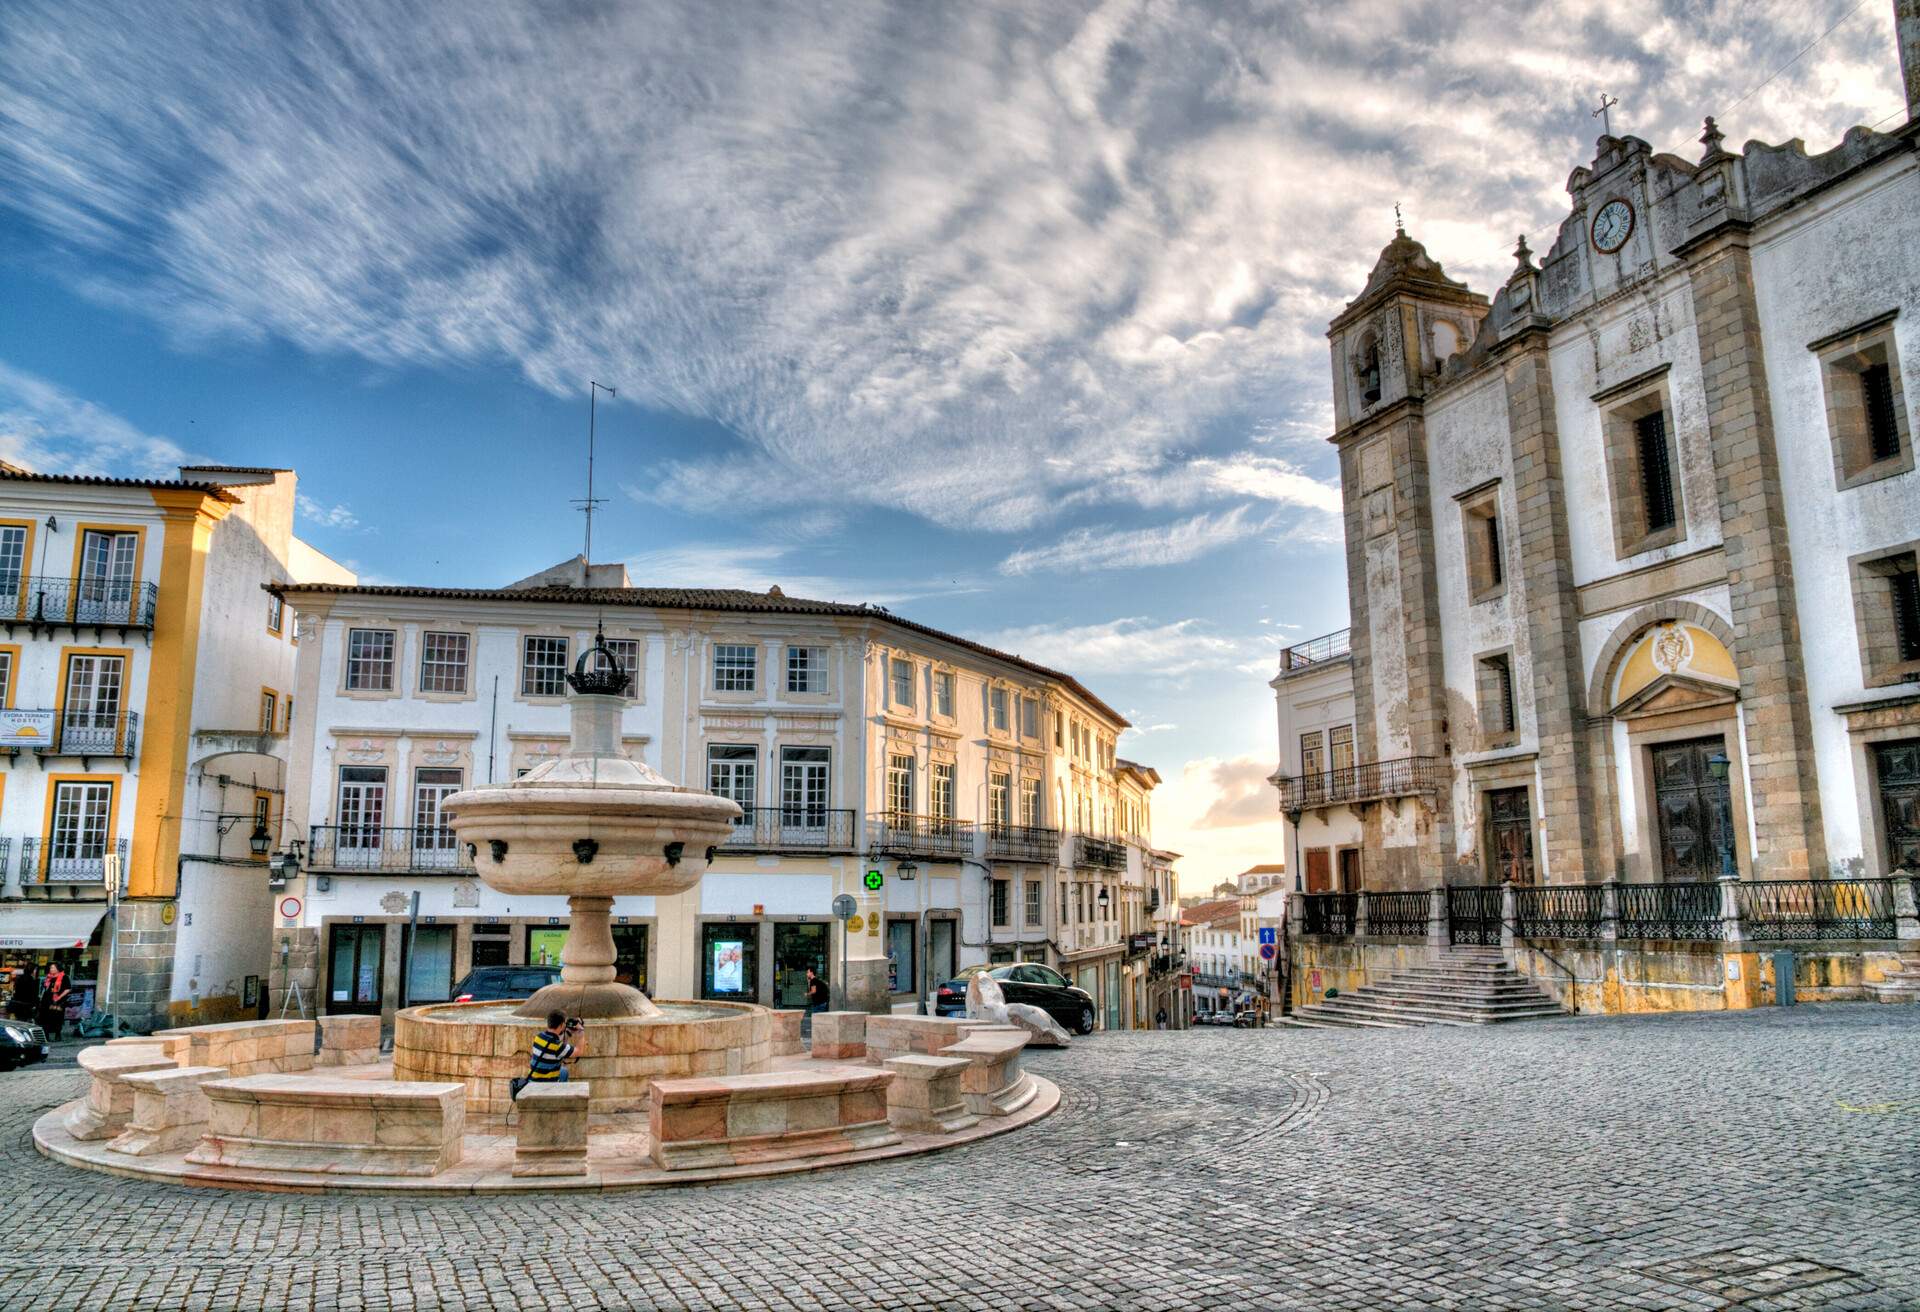 A circular marble fountain in the middle of a cobbled square confined with buildings.